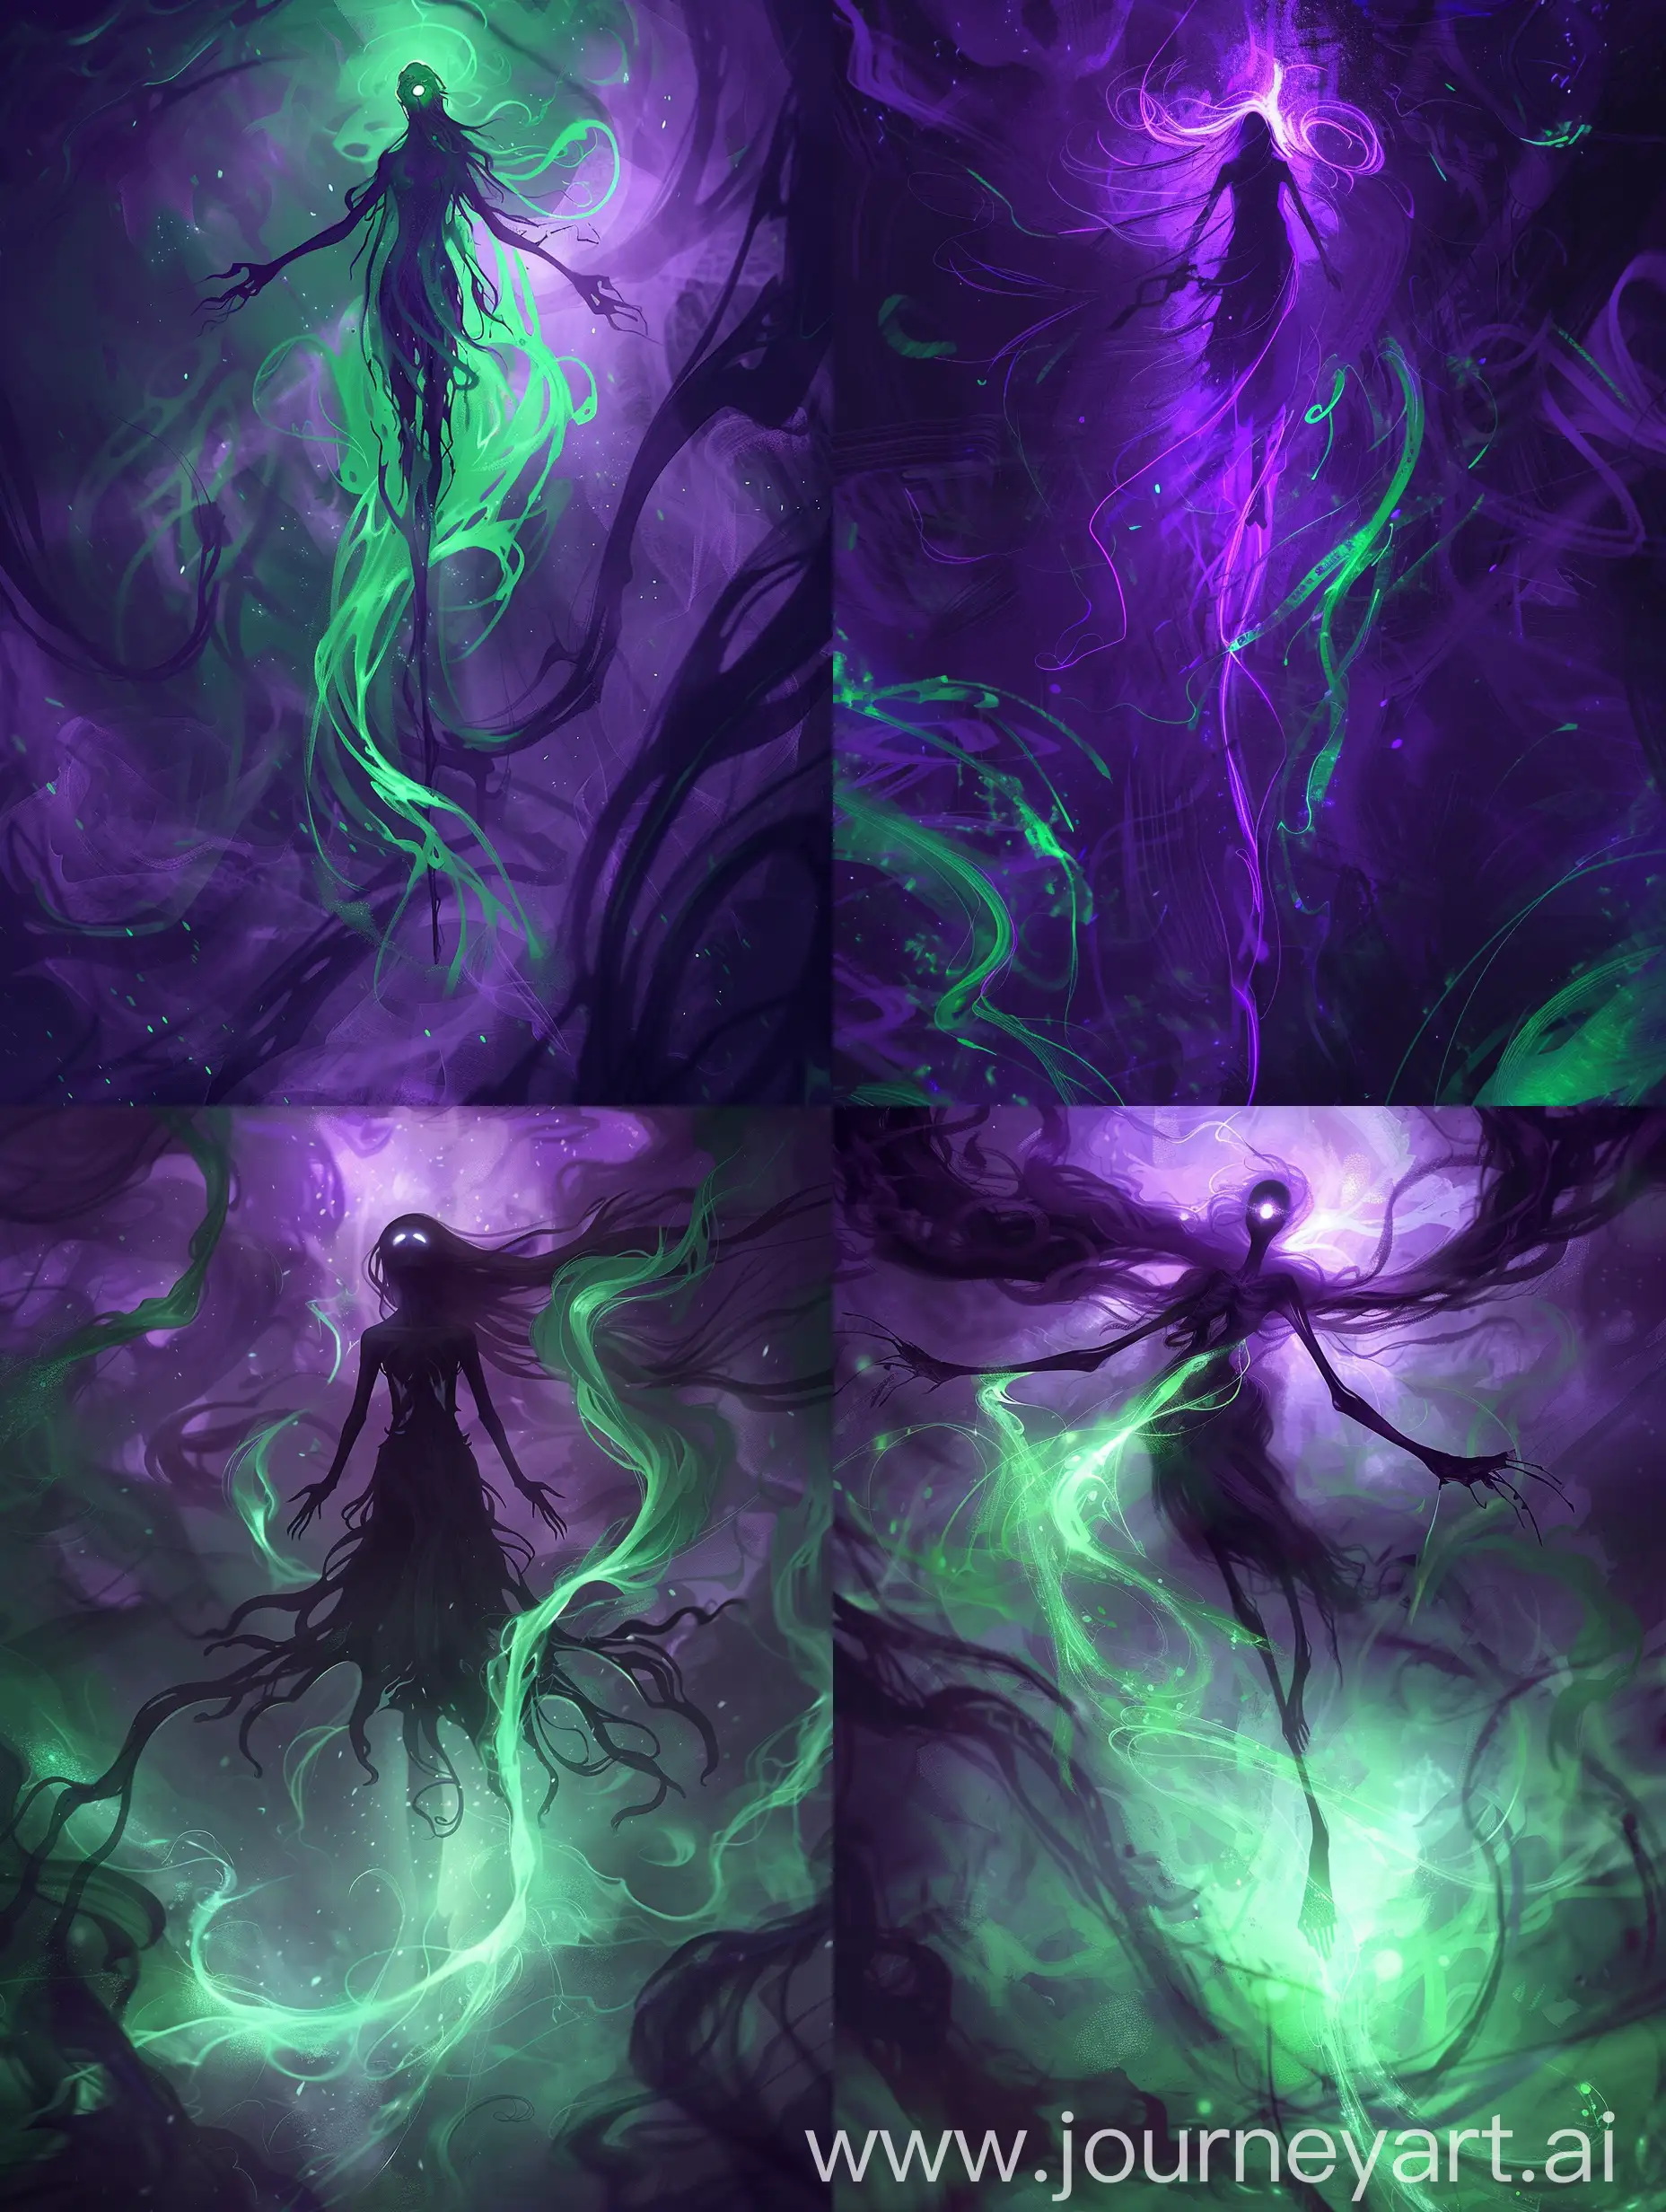 digital illustration, surreal and eerie art style, mystery, supernatural themes, floating female figure with elongated limbs and hollow eyes, surrounded by swirling shadows and otherworldly light, predominantly deep purple with hints of green luminescence, ethereal mist adding texture, warped reality and dream-like atmosphere, billowing hair merging with spectral forms, chilling and enigmatic mood, detailed and haunting features, striking contrast, intricate and ghostly patterns